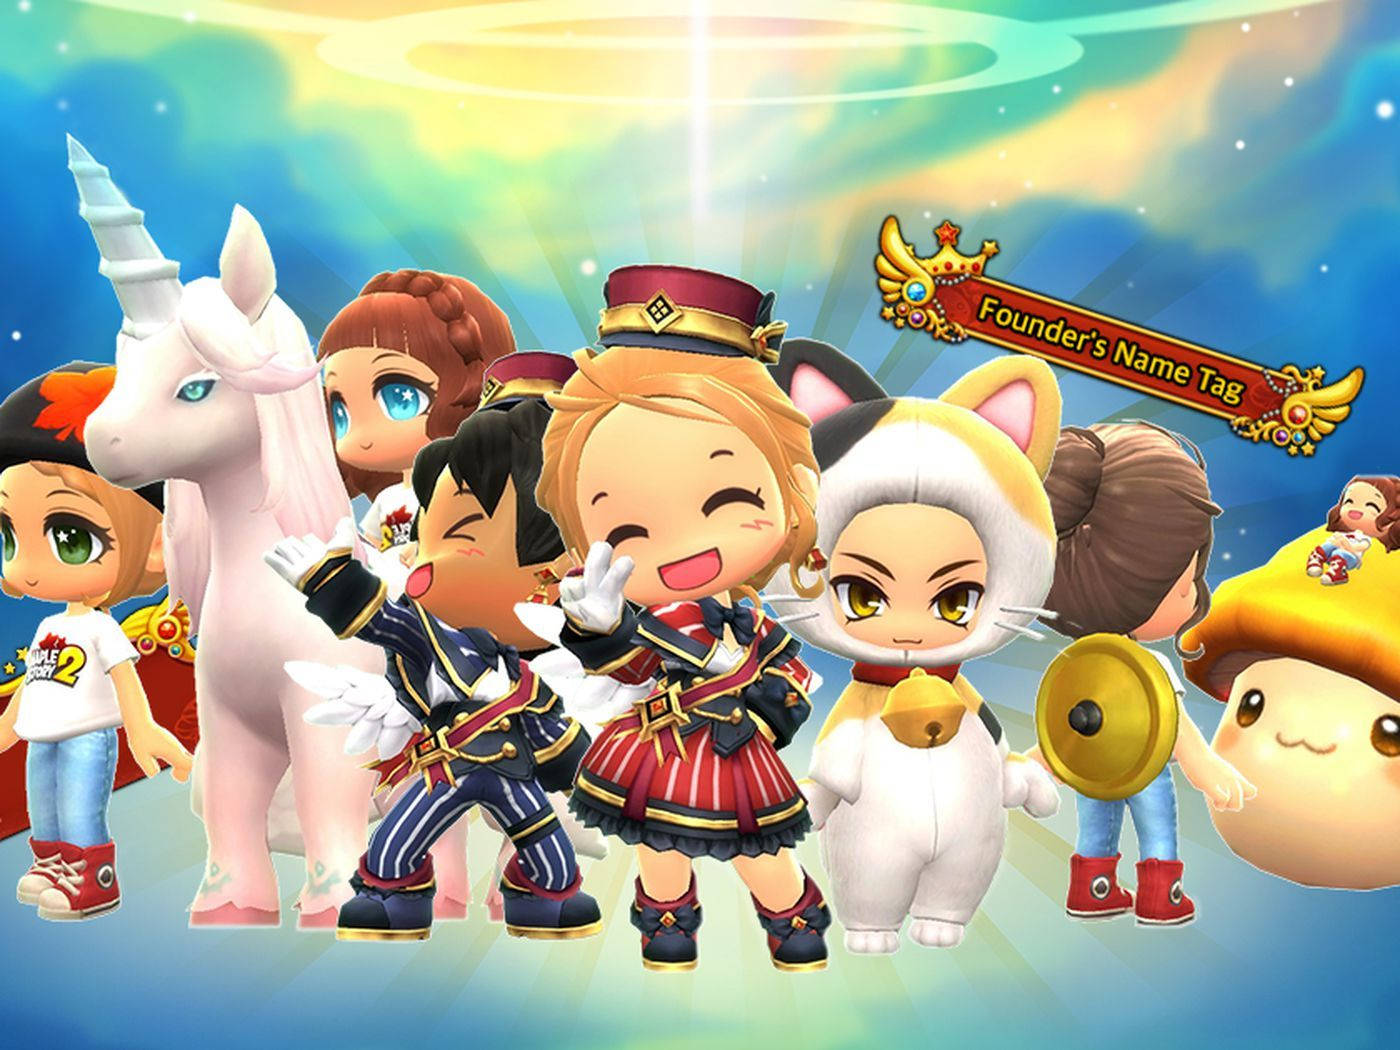 Play MapleStory 2 and join millions of fans around the world in an exciting adventure. Wallpaper